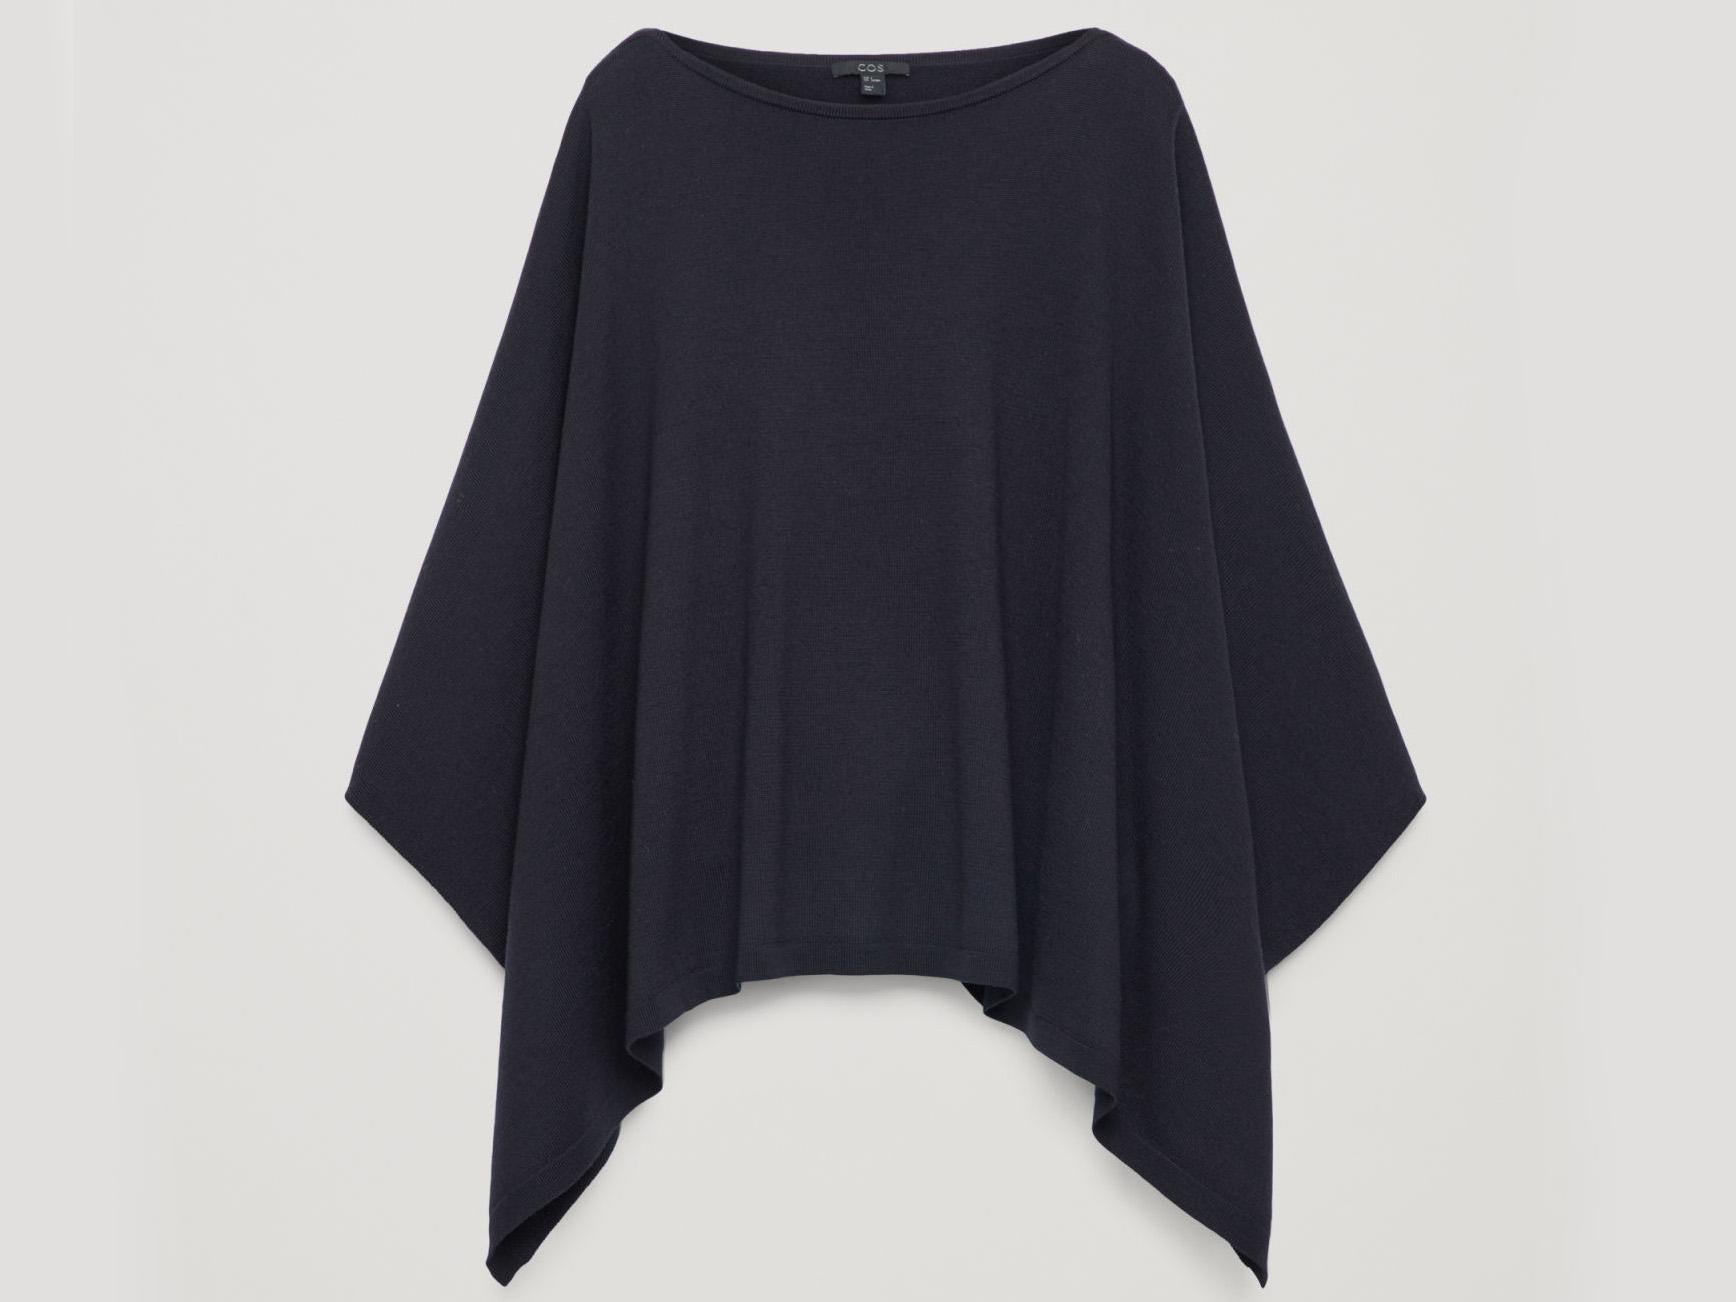 Wool cape scarf, £69, Cos